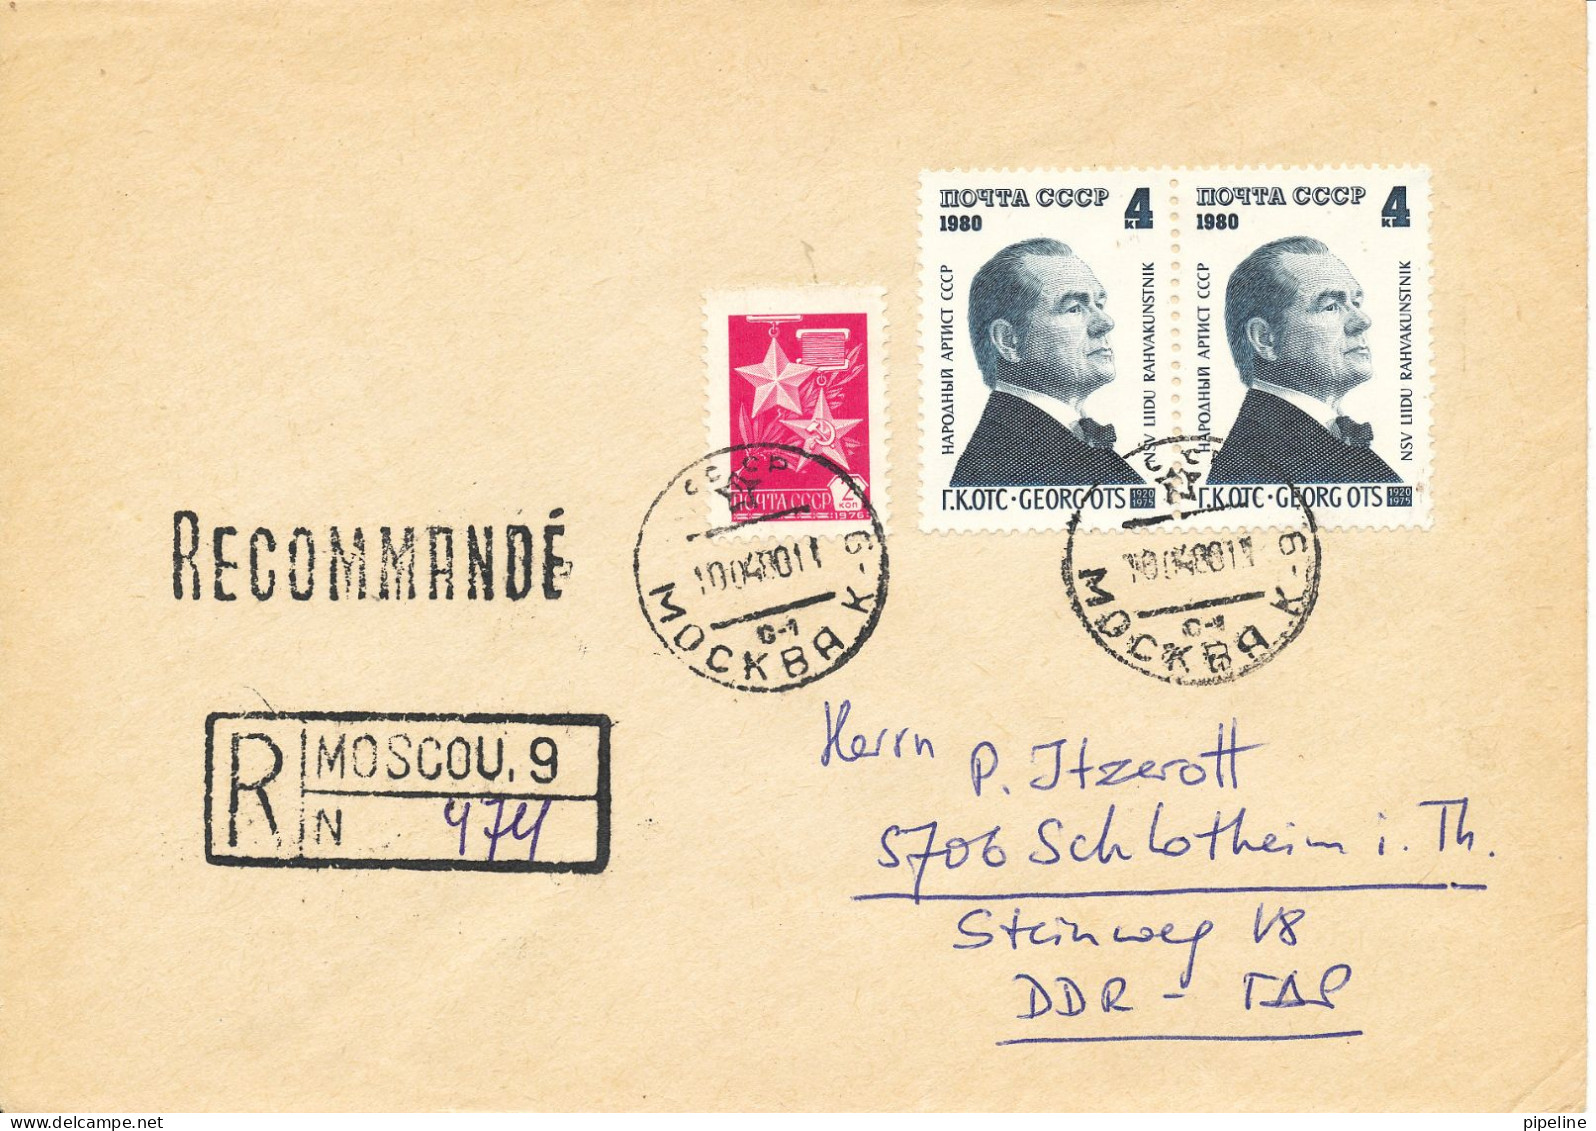 USSR Registered Cover Sent To Germany DDR 10-4-1980 Topic Stamps - Lettres & Documents